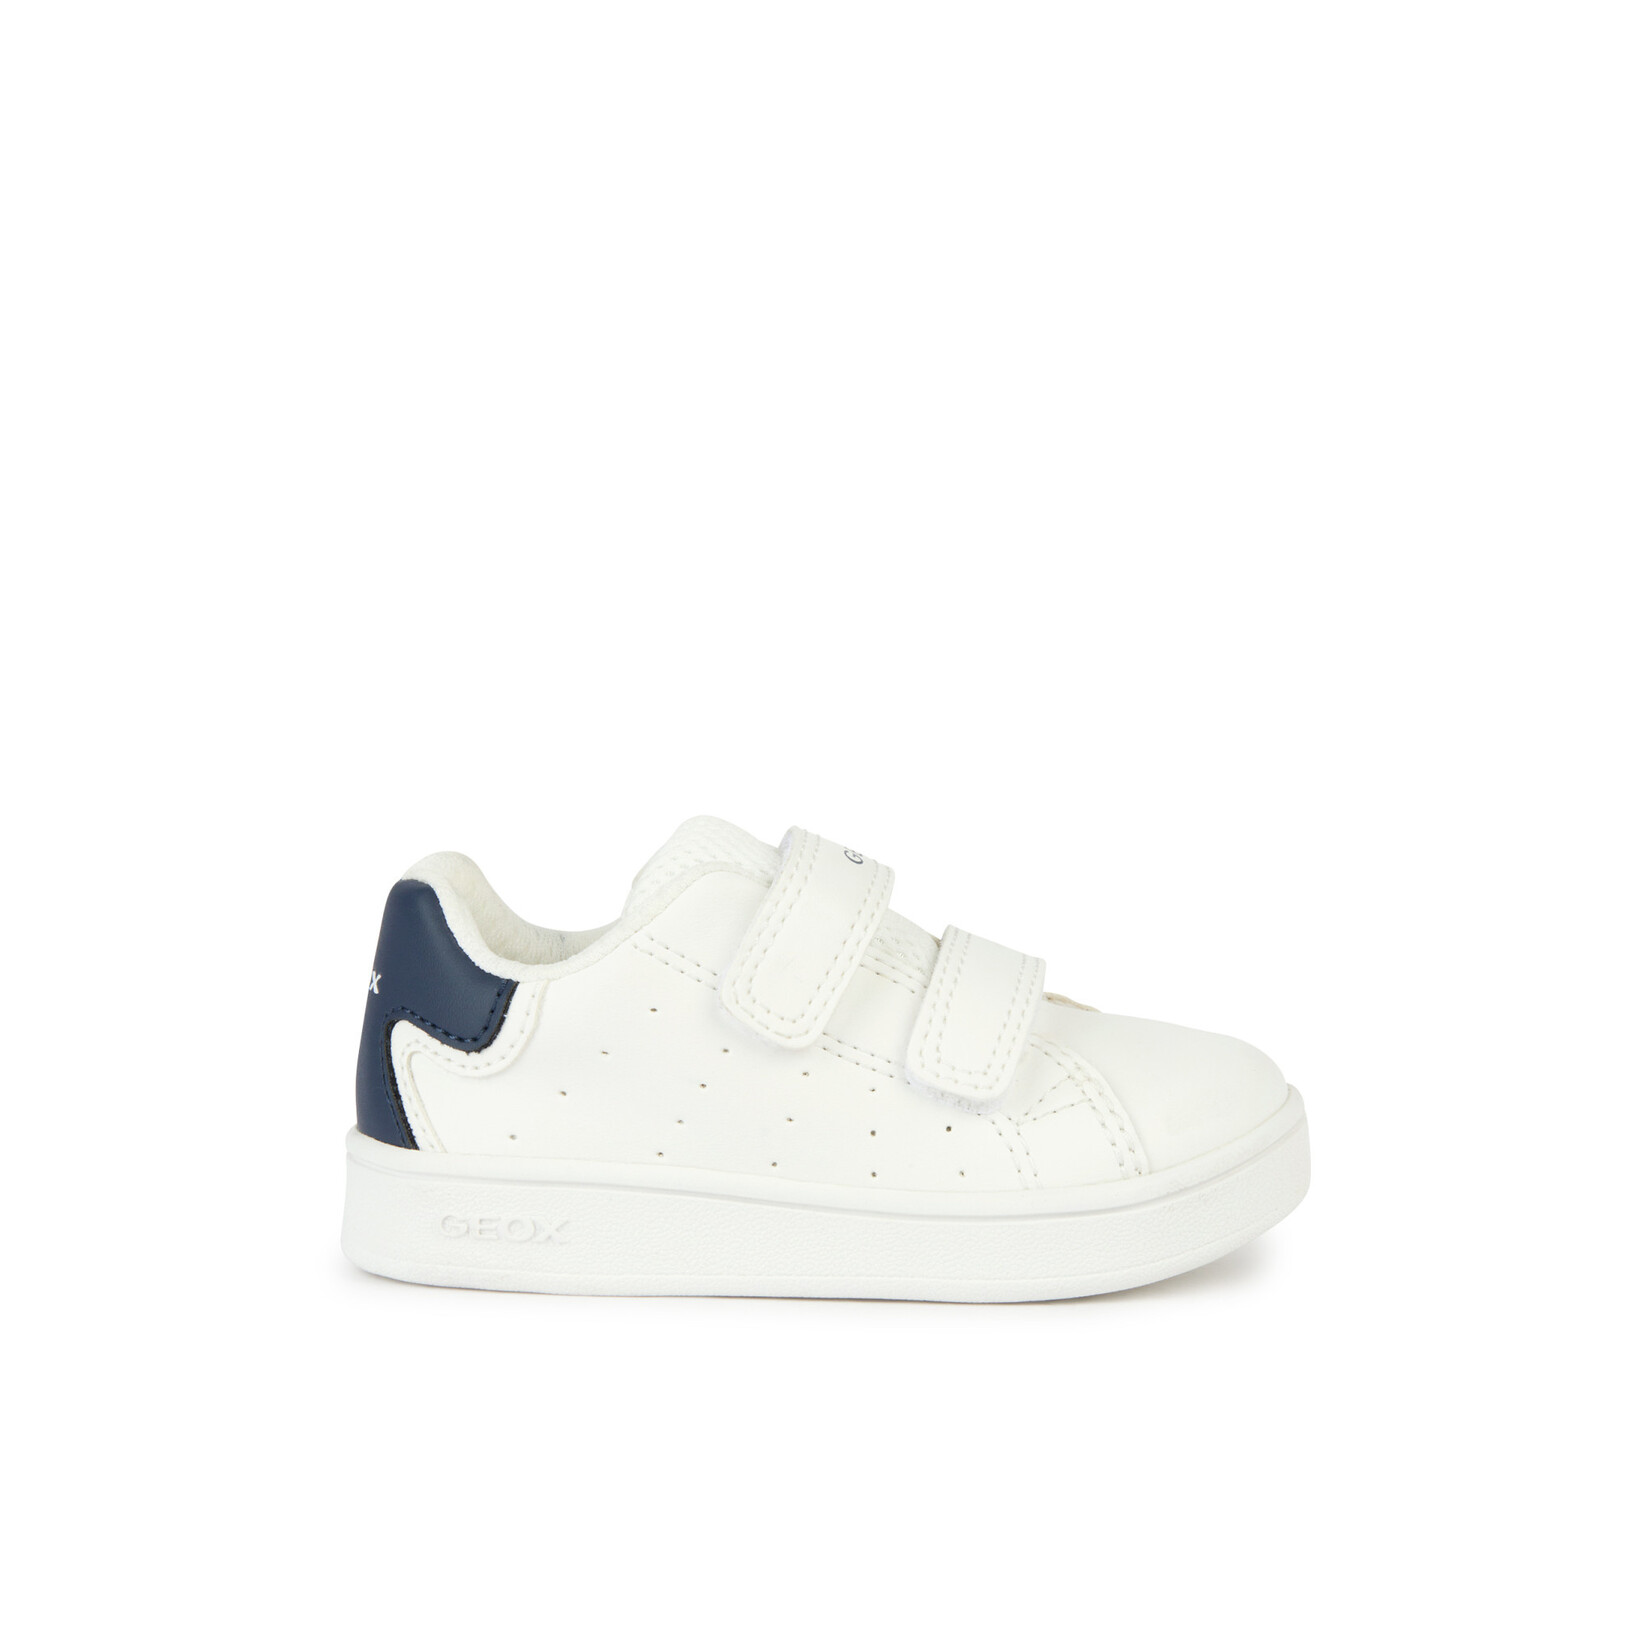 Geox GEOX - Synthetic Leather Sneakers 'B. ECLYPER' - White/Navy